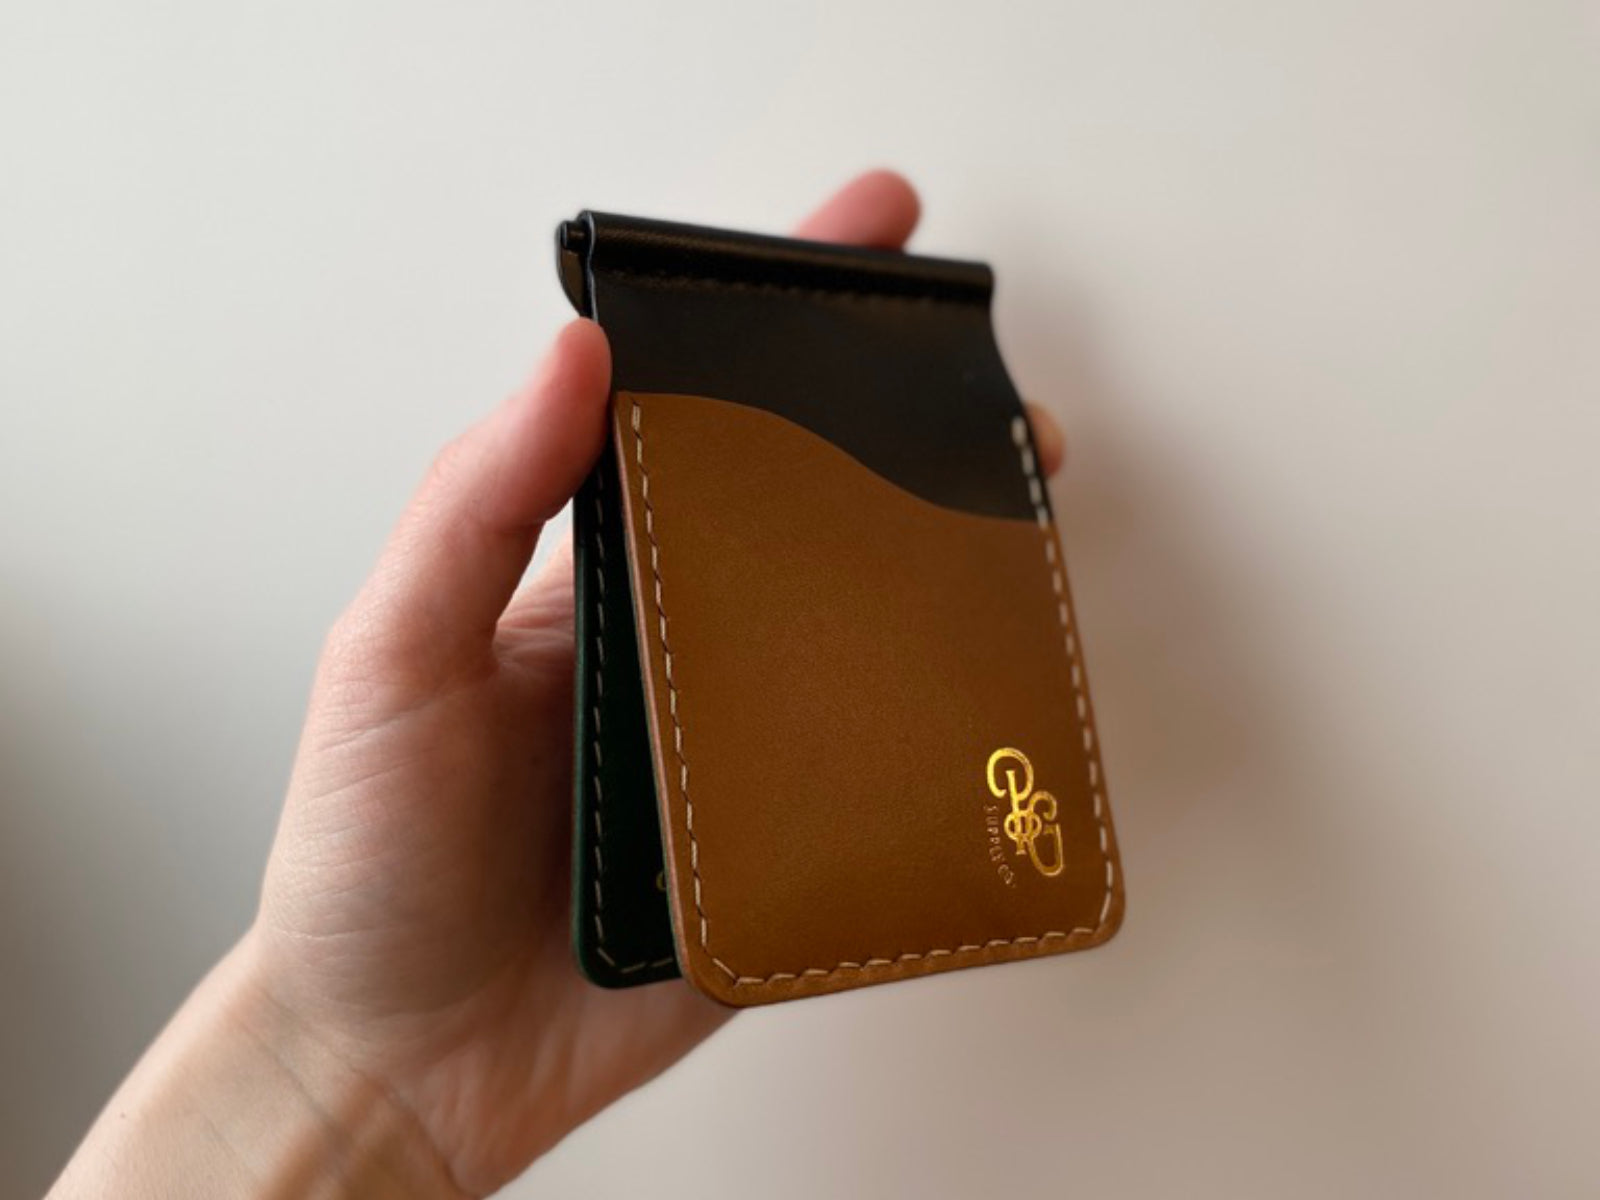 Build your own custom dunvegan money clip wallet with black, tan and pine leather